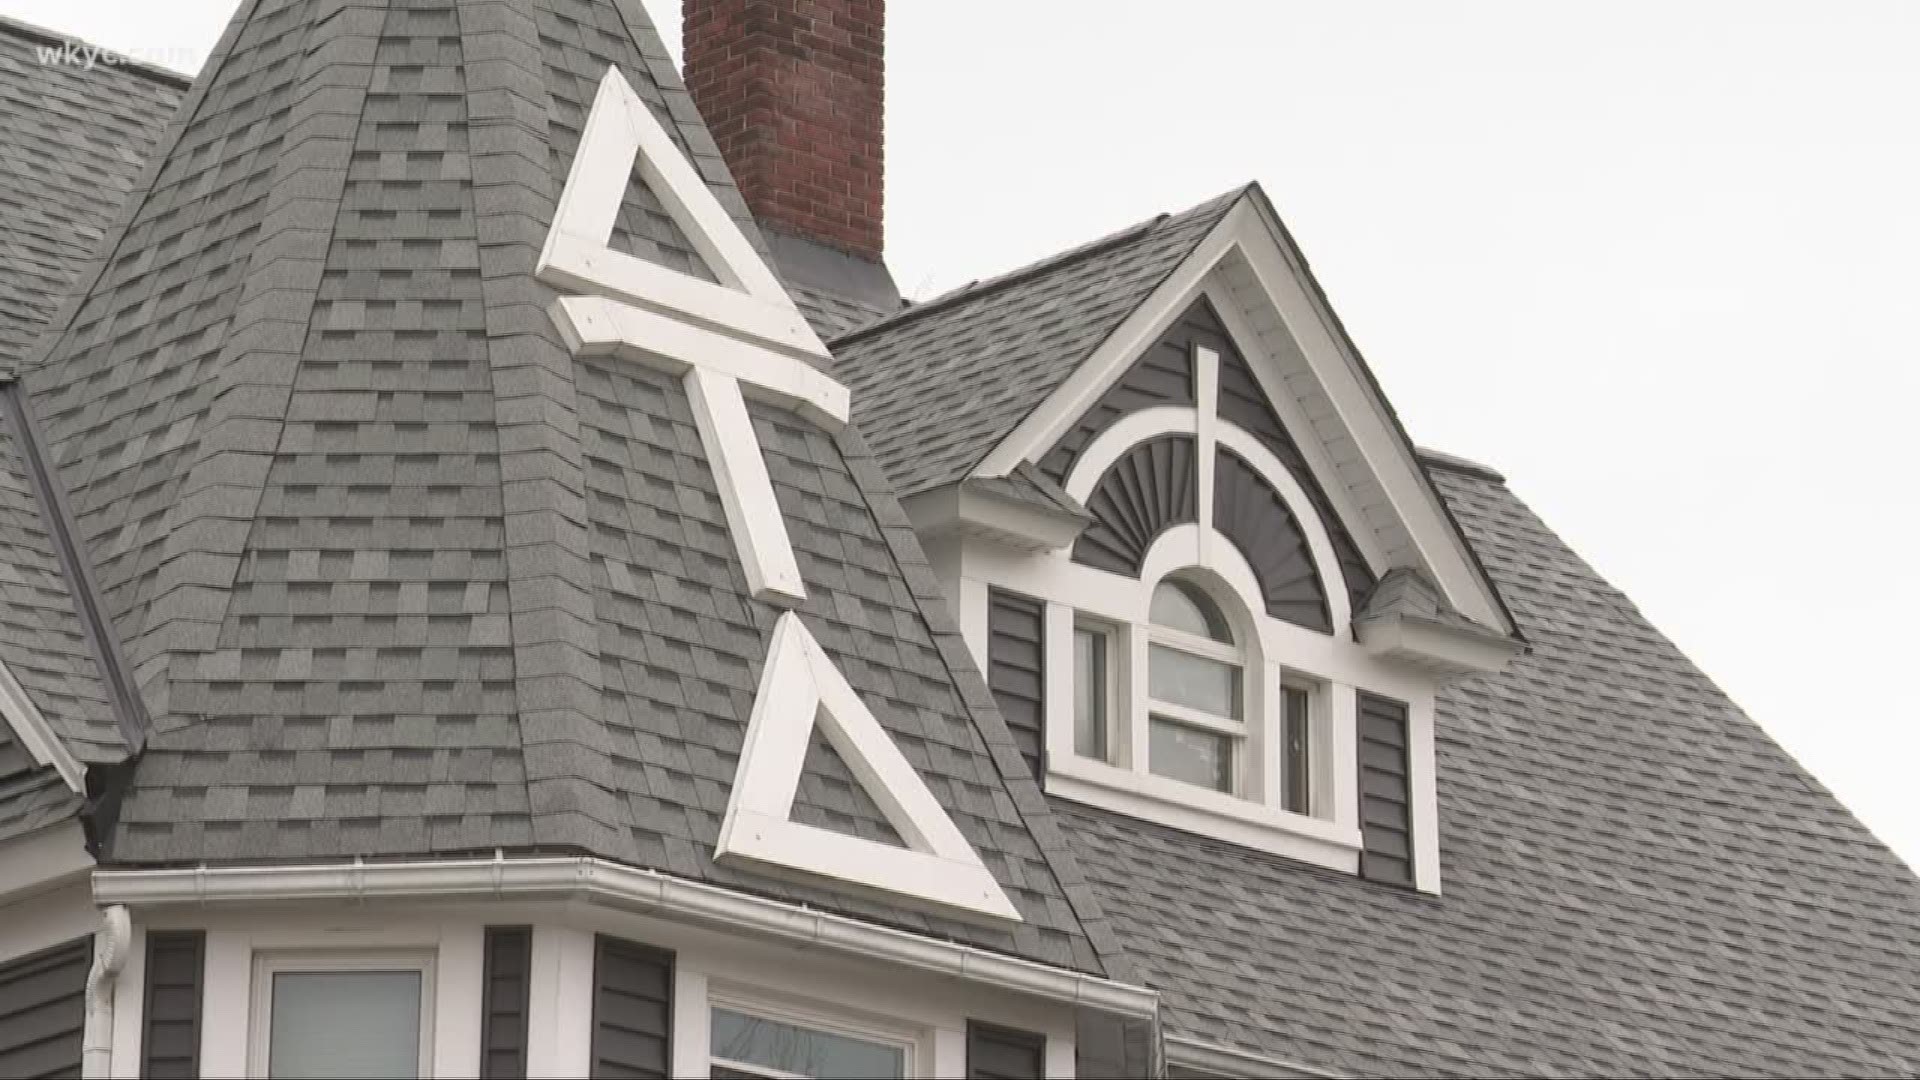 Kent State Delta Tau Delta fraternity chapter suspended amid investigation